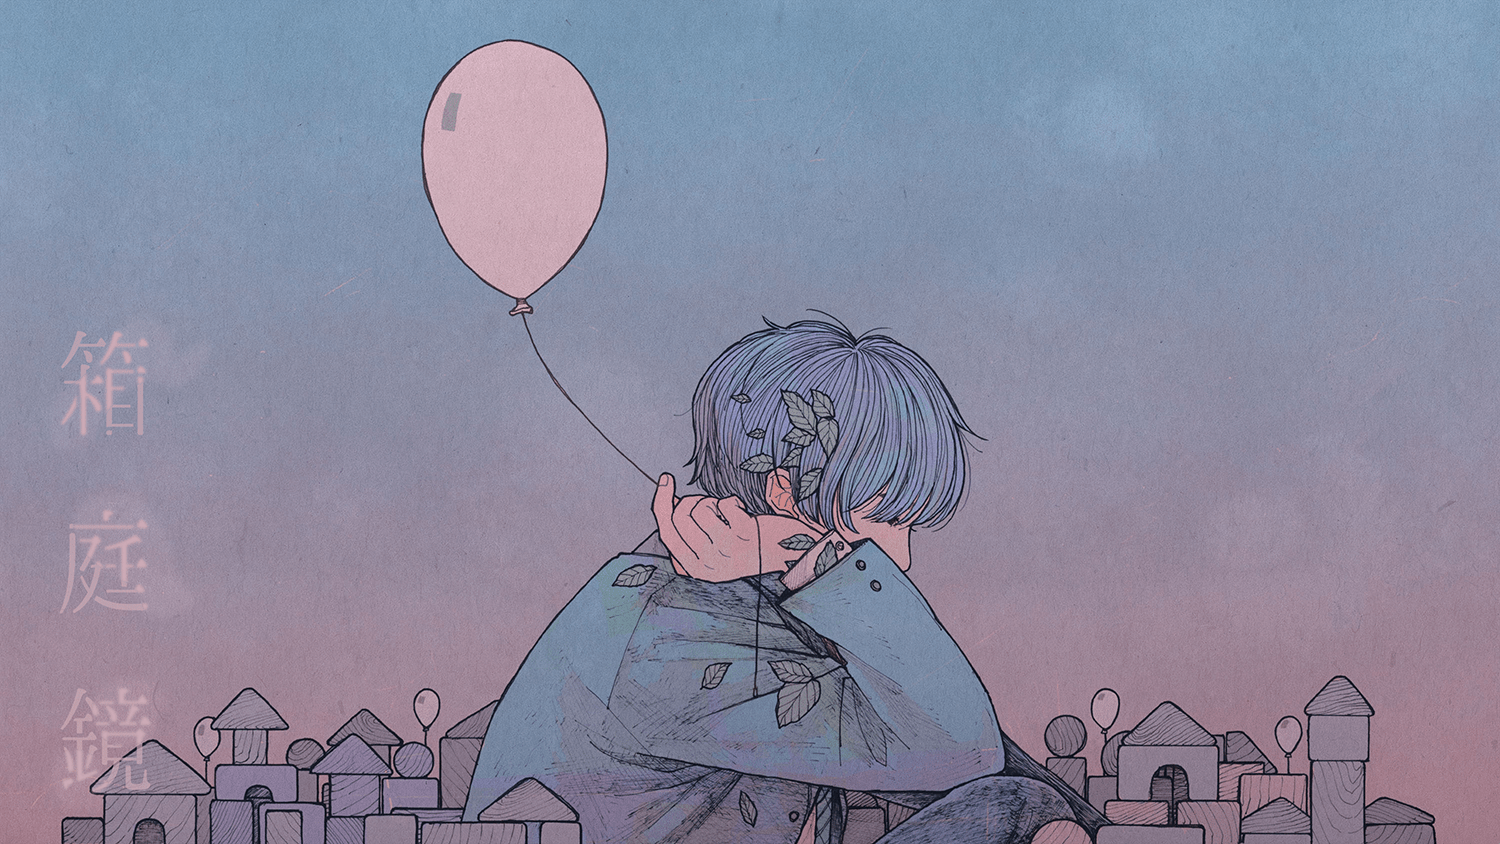 An illustration of a person holding a balloon and a small bird, with the text 